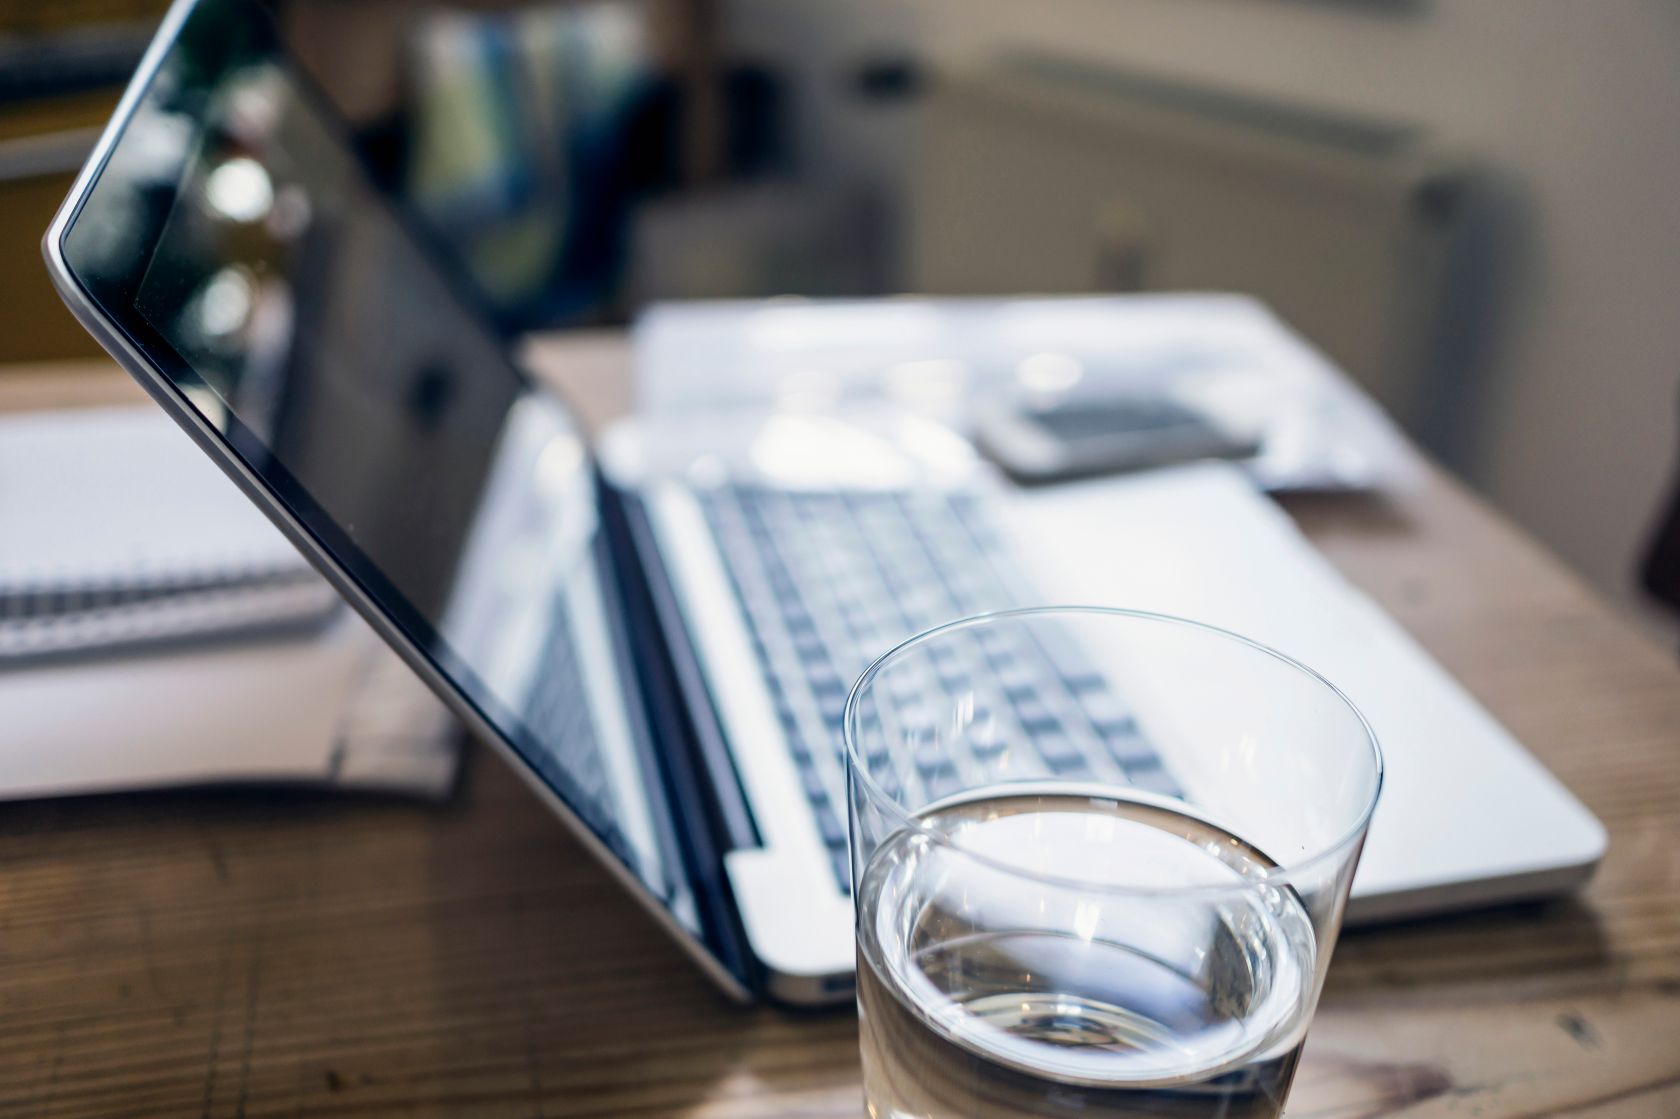 Glass of water, documents and laptop on a wooden table